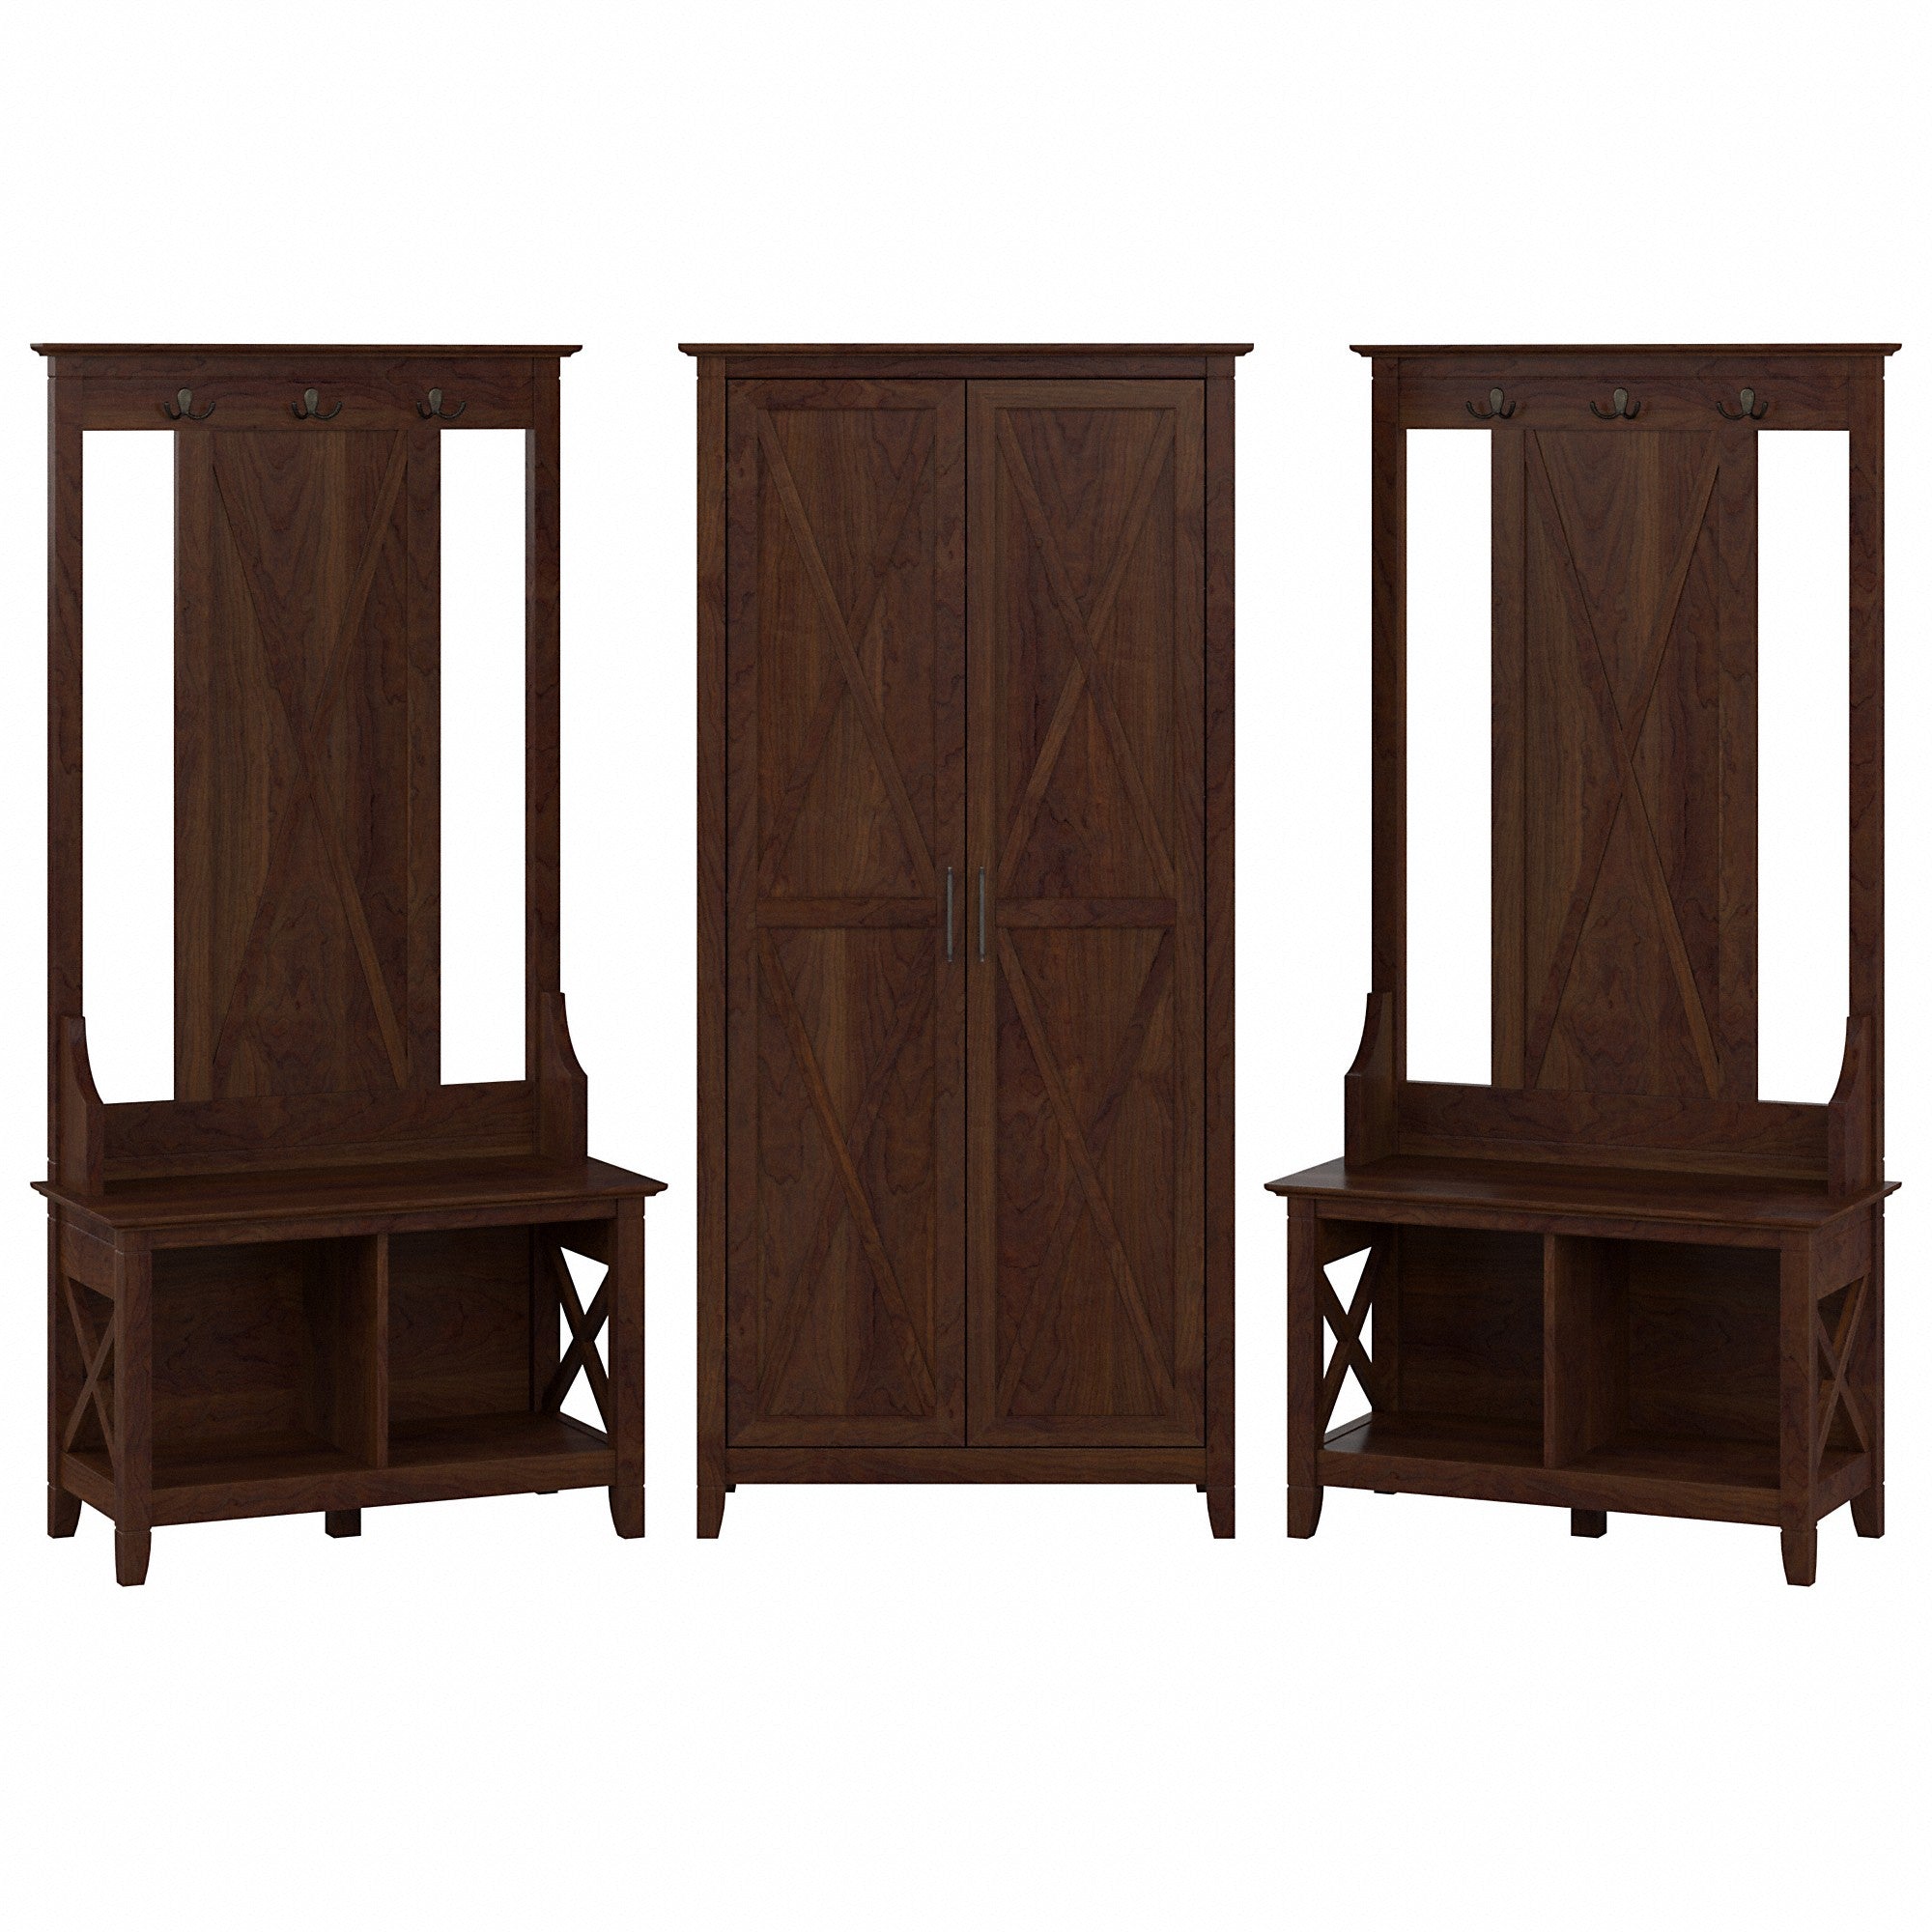 Tall Shoes Cabinet, Entryway Furniture, Hallway storage cabinet